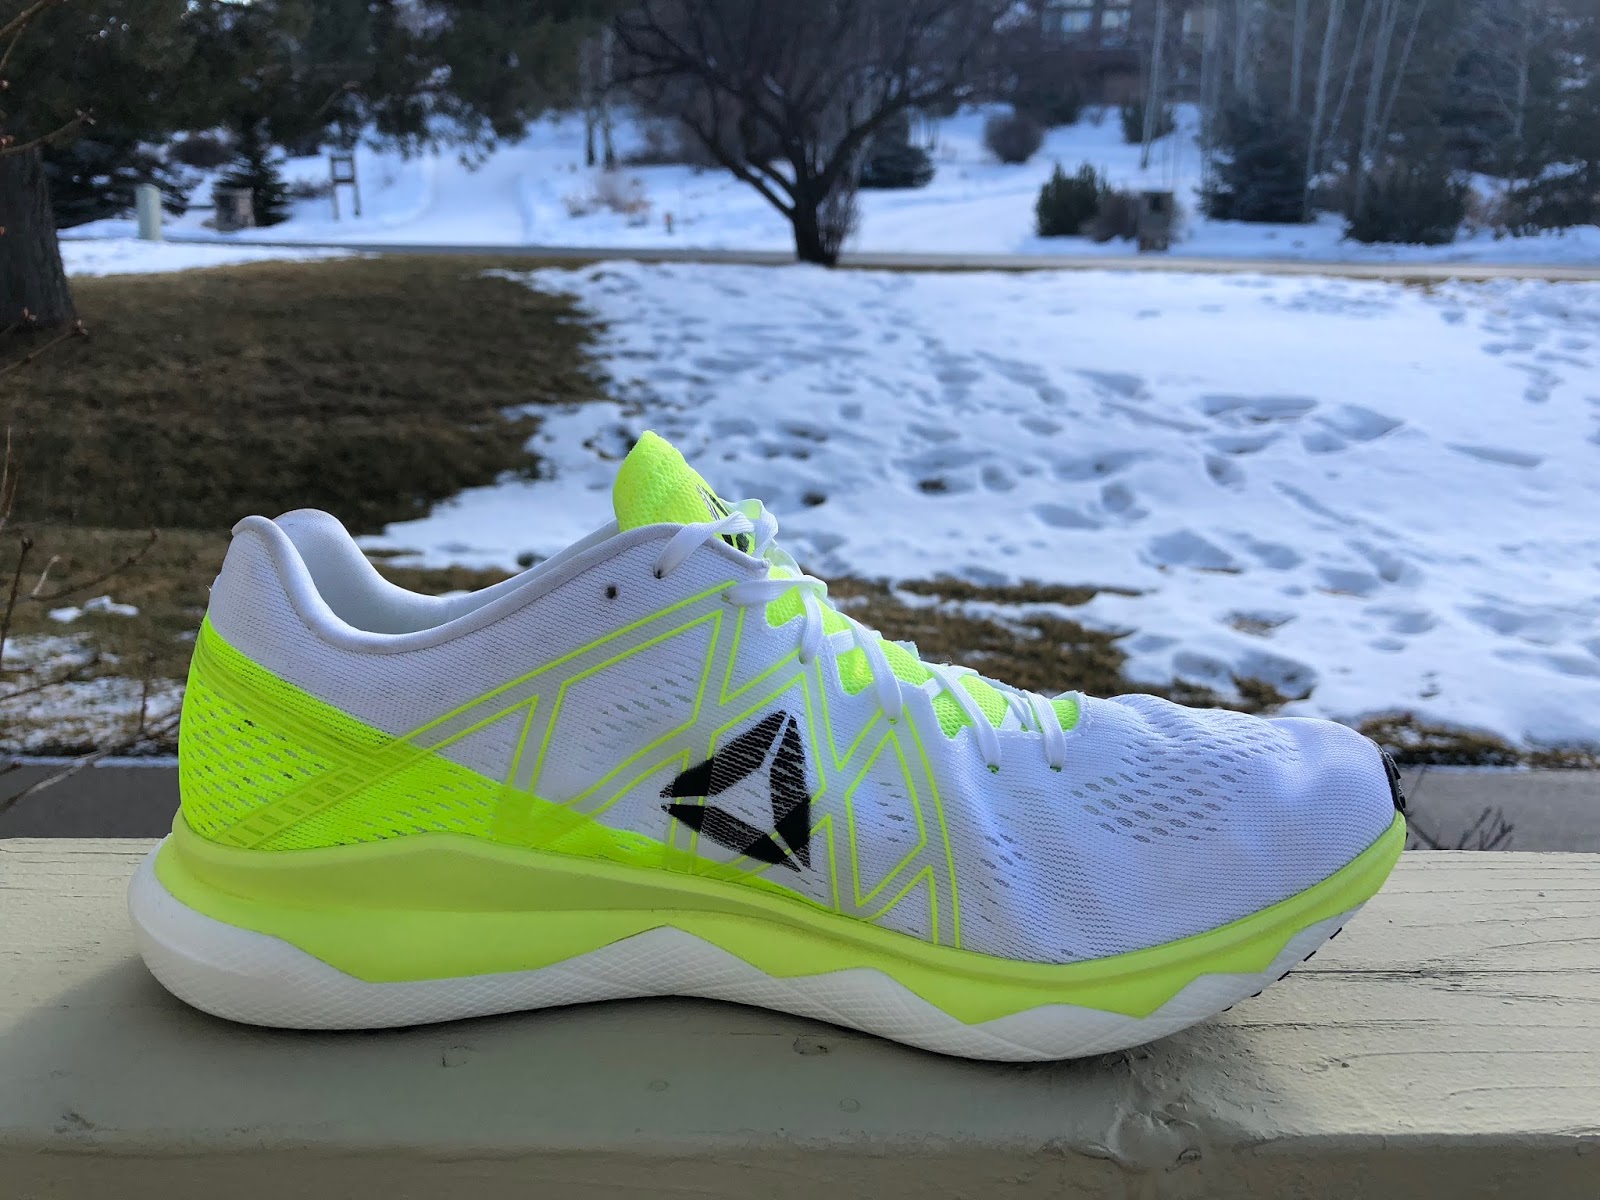 Road Trail Run: Reebok Run ULTK Review Review Floatride Run Fast: A Huge Hit and a Close Miss